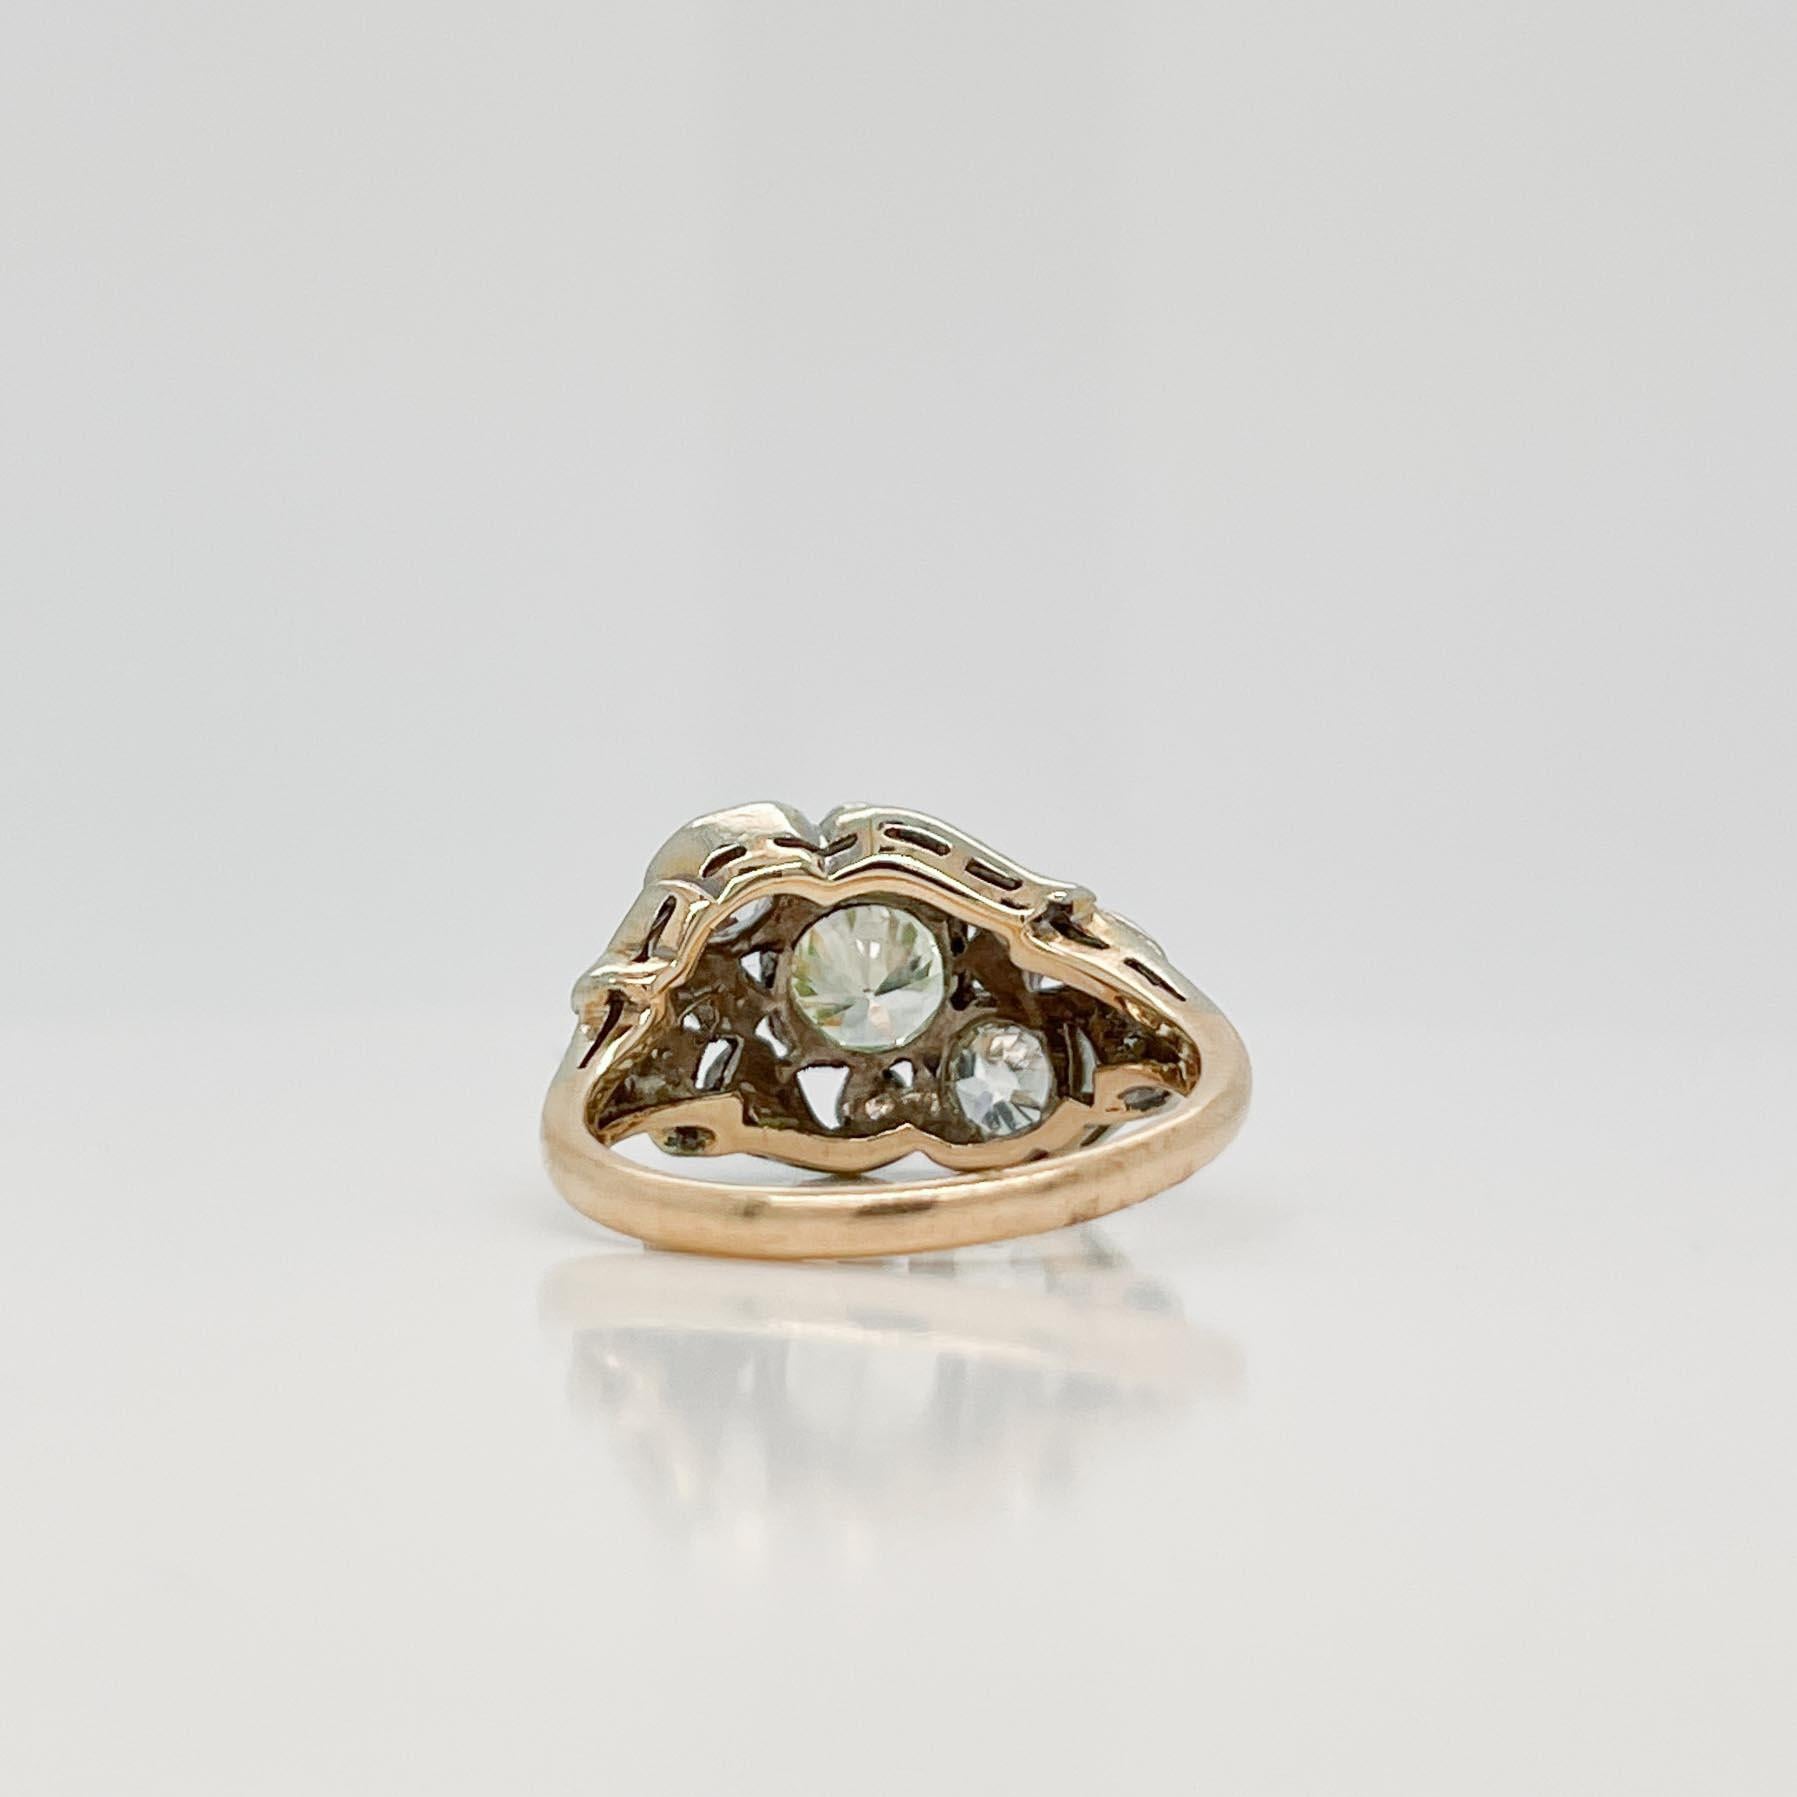 Signed Antique Art Deco 14K Gold & Diamond Three Stone Cocktail Ring For Sale 2